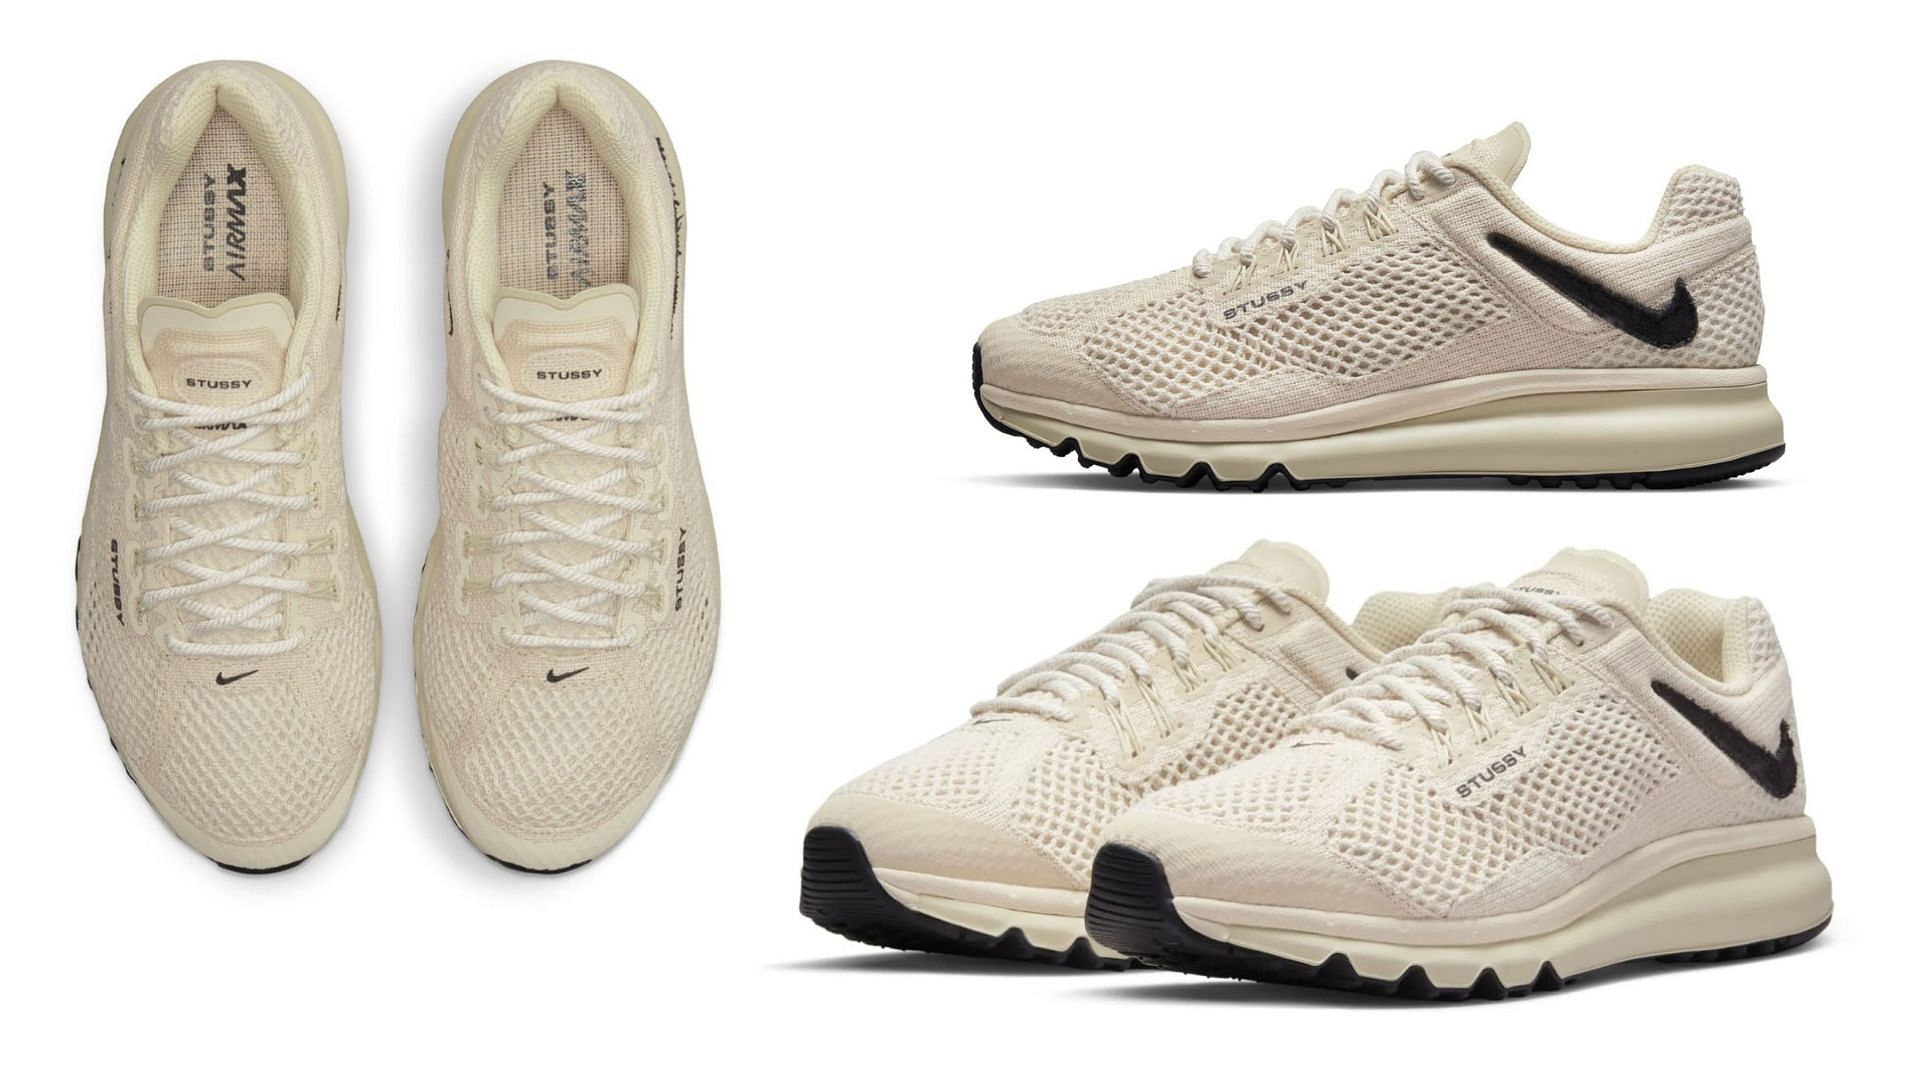 Take a closer look at the Stussy x Nike Air Max 2015 Fossil colorway (Image via Sportskeeda)